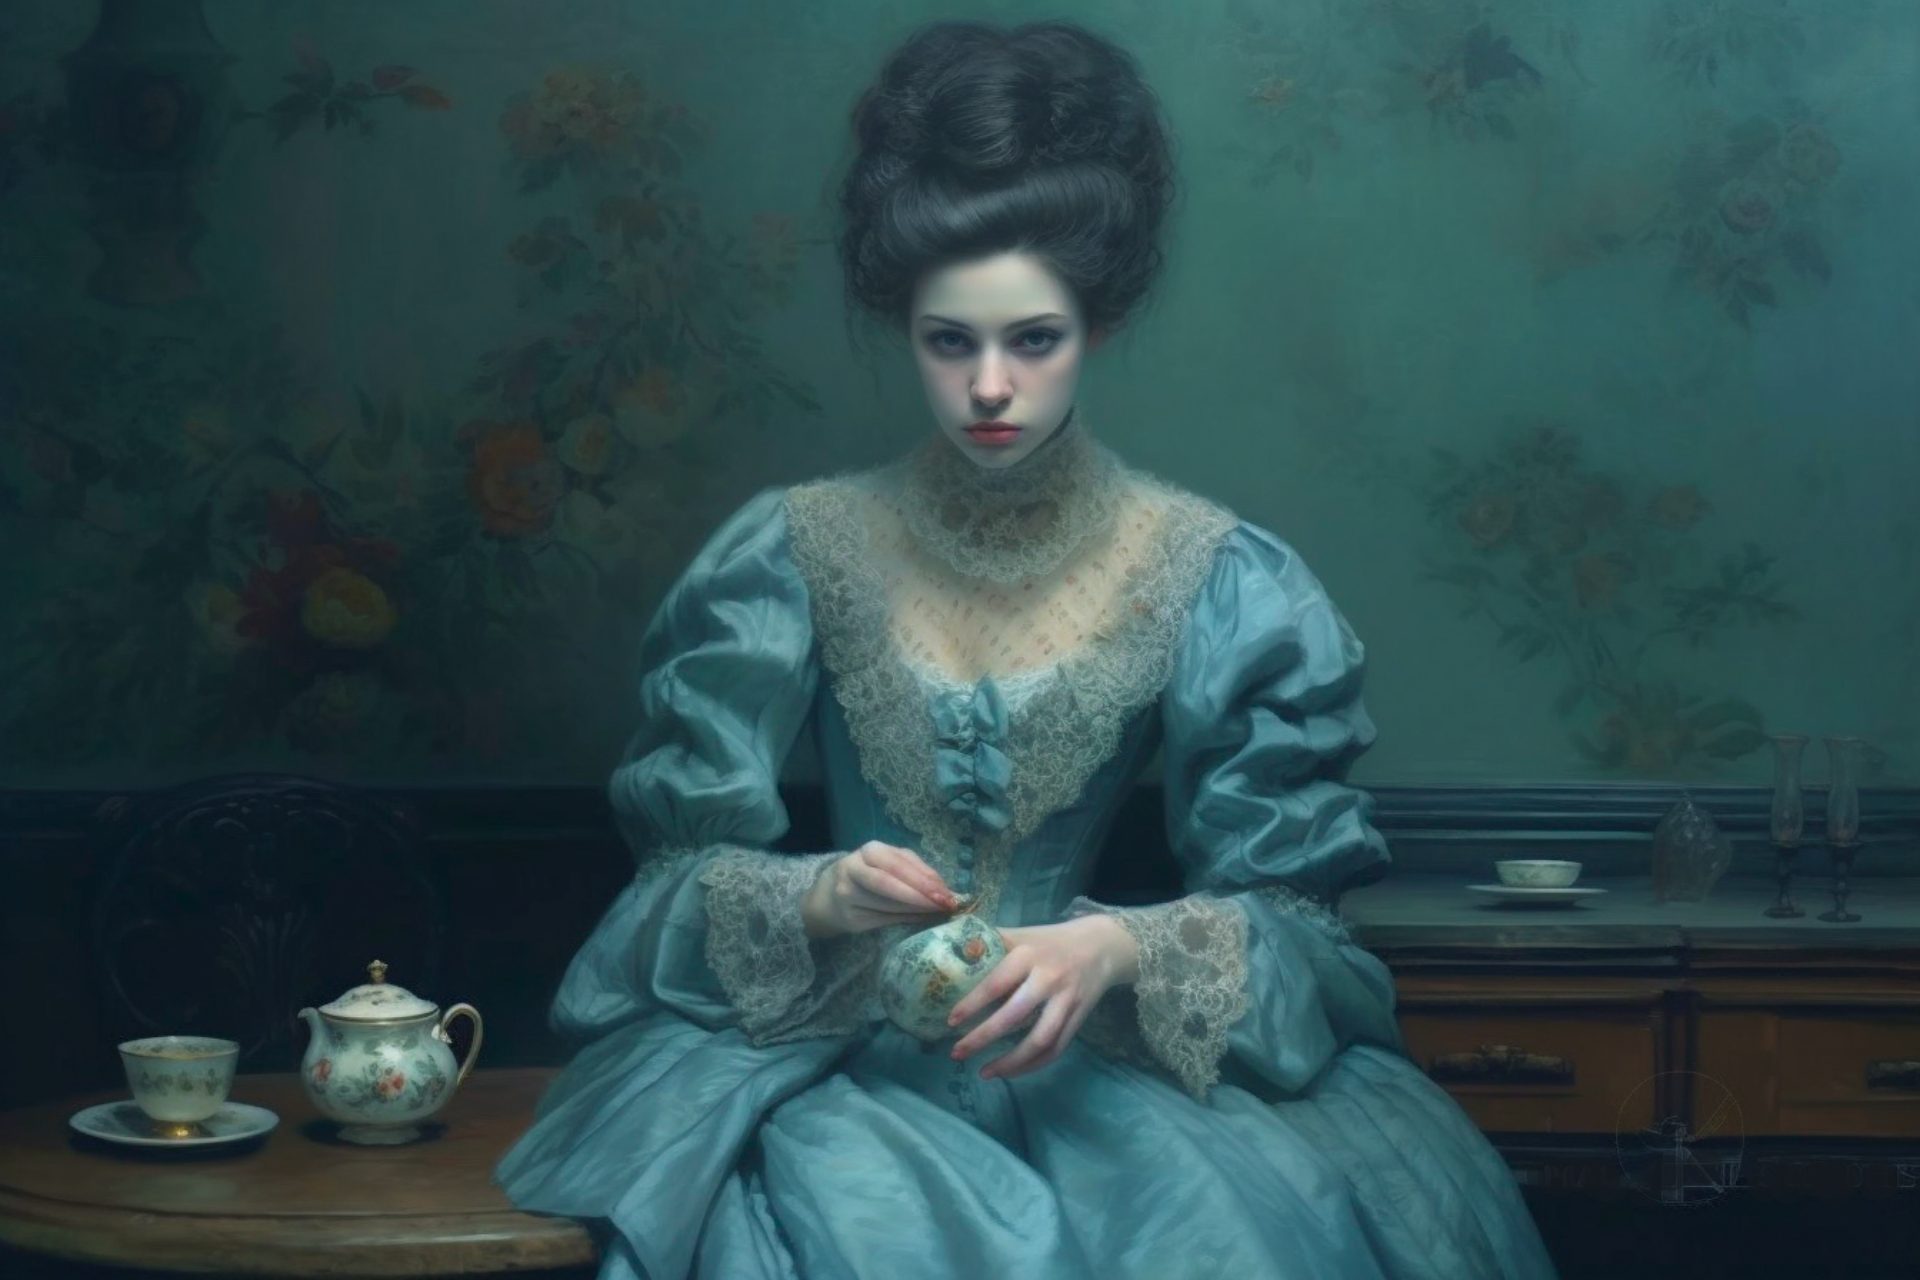 An illustration of a Victorian-Era young woman wearing a light blue dress and having tea.